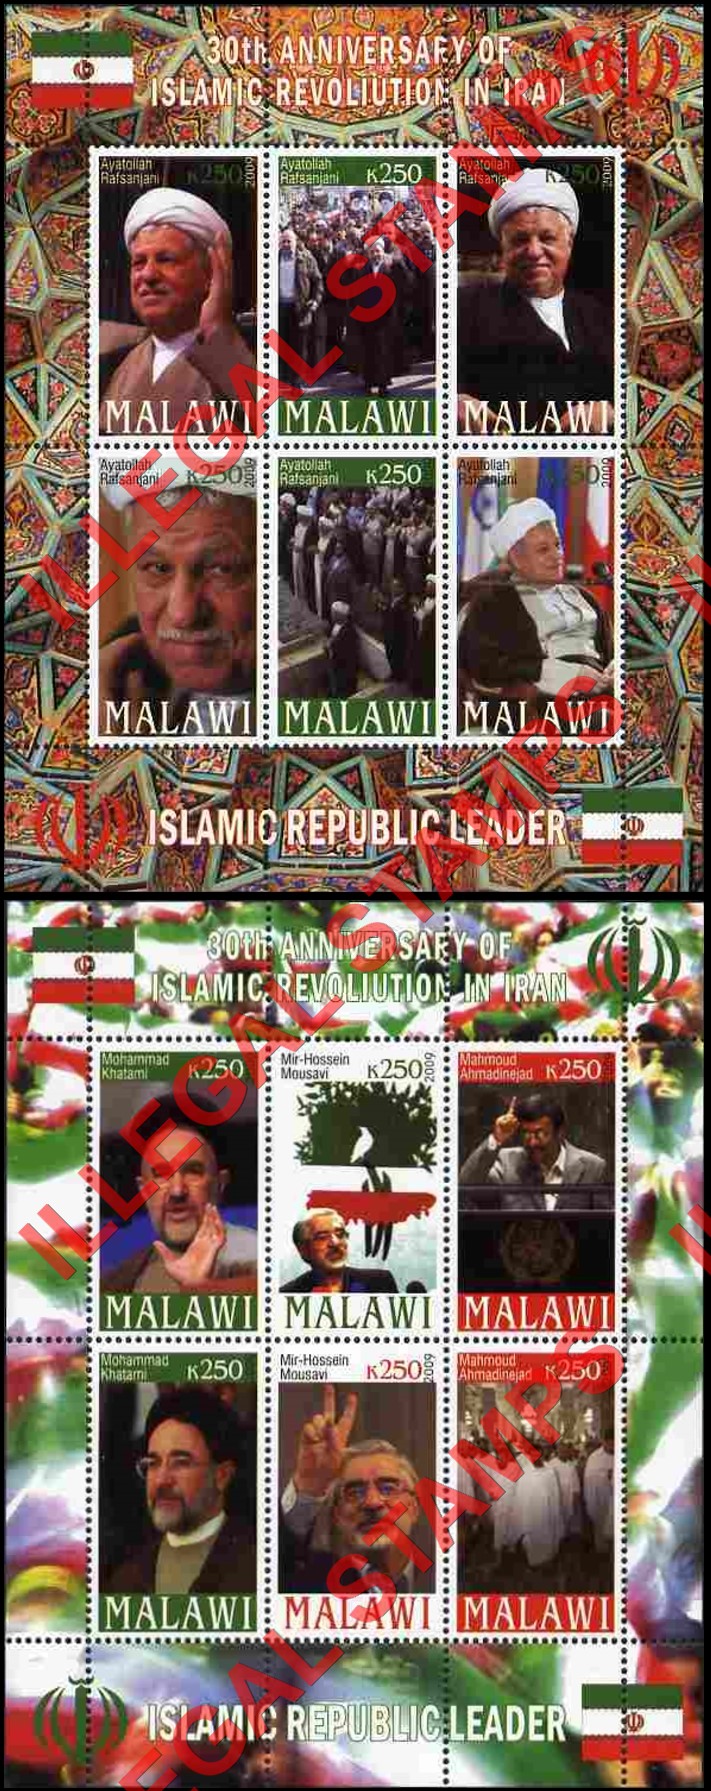 Malawi 2009 Islamic Revolution in Iran Illegal Stamp Souvenir Sheets of 6 (Part 2)